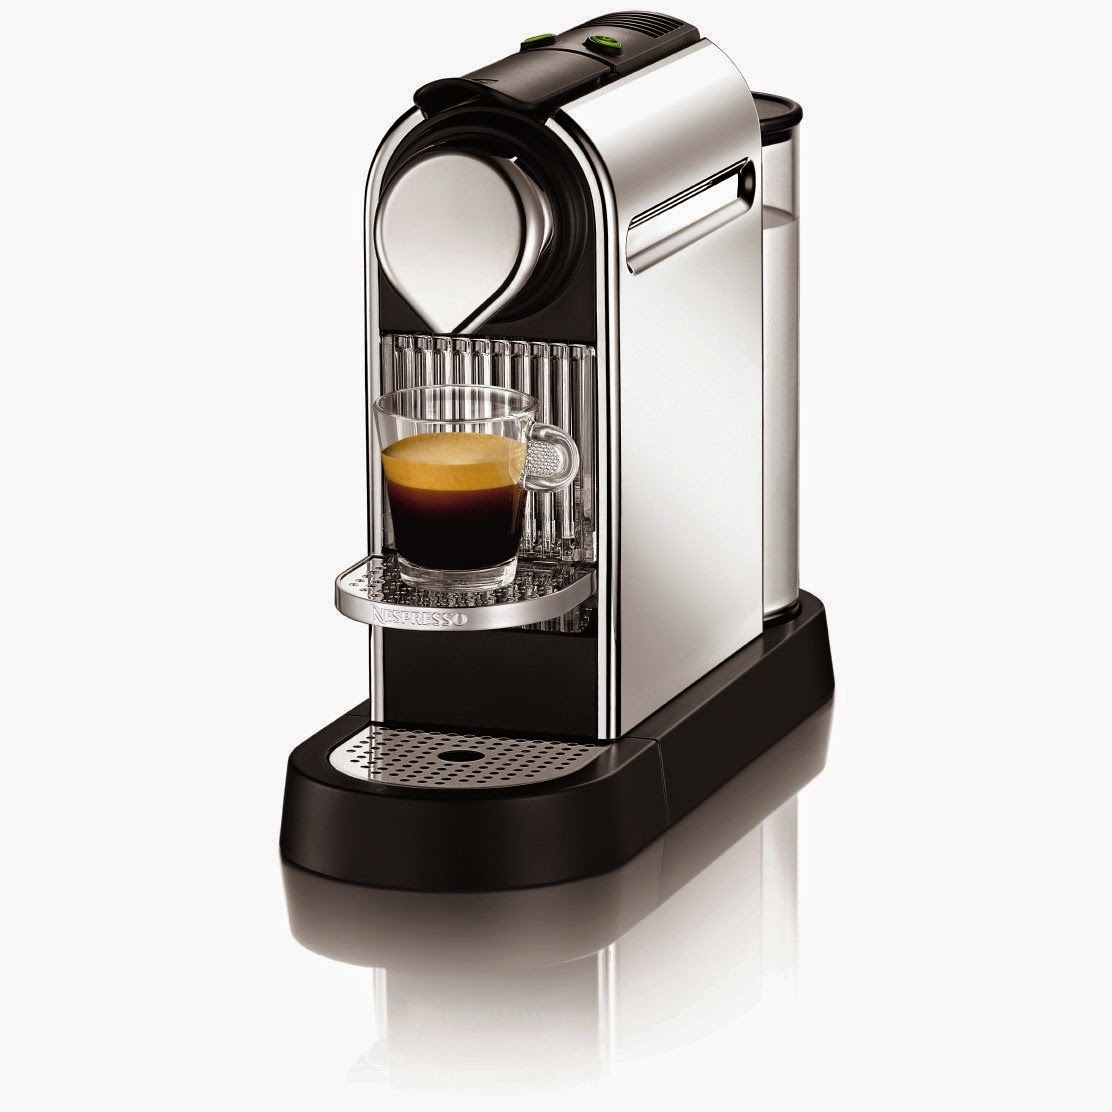 Nespresso Citiz C111 Espresso Maker, review, coffee in less than 30 seconds, makes espresso and lungo, 19-bar high pressure pump for extracting the best flavors, uses pods for fresh coffee